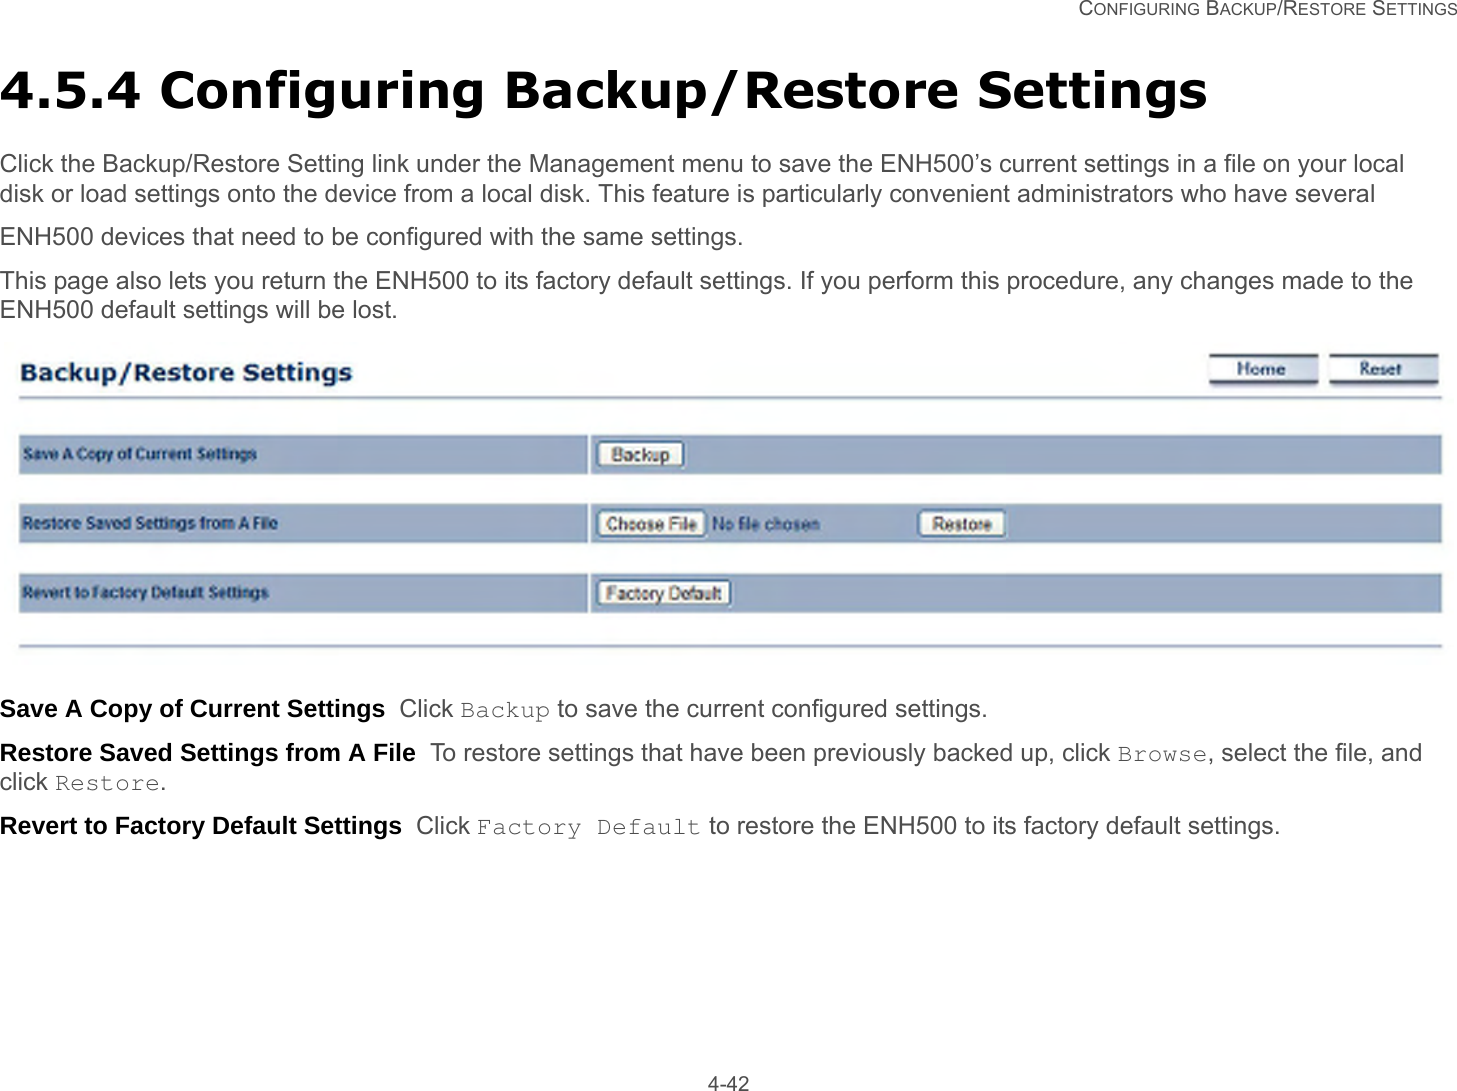   CONFIGURING BACKUP/RESTORE SETTINGS 4-424.5.4 Configuring Backup/Restore SettingsClick the Backup/Restore Setting link under the Management menu to save the ENH500’s current settings in a file on your local disk or load settings onto the device from a local disk. This feature is particularly convenient administrators who have several ENH500 devices that need to be configured with the same settings.This page also lets you return the ENH500 to its factory default settings. If you perform this procedure, any changes made to the ENH500 default settings will be lost.Save A Copy of Current Settings  Click Backup to save the current configured settings.Restore Saved Settings from A File  To restore settings that have been previously backed up, click Browse, select the file, and click Restore.Revert to Factory Default Settings  Click Factory Default to restore the ENH500 to its factory default settings.